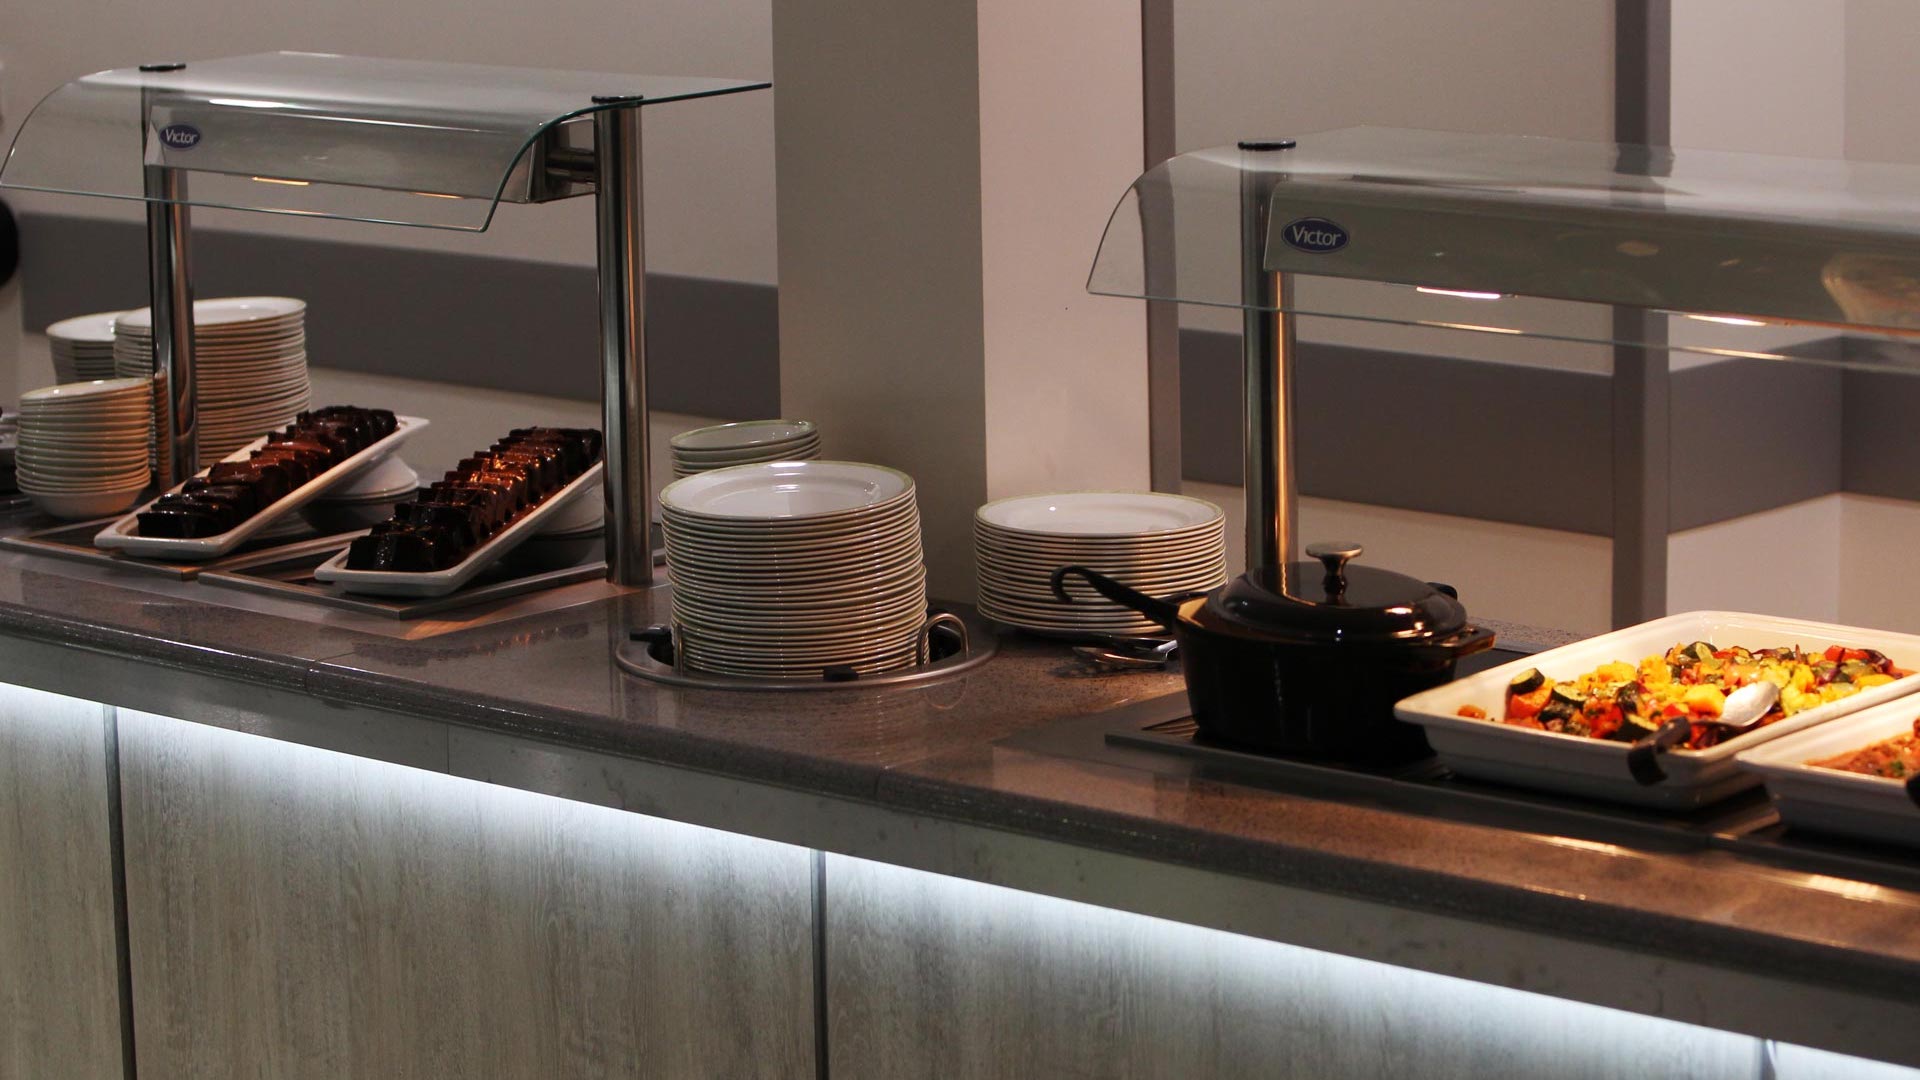 Workplace and Canteen Kitchen Design - Nelson Bespoke Commercial Kitchens